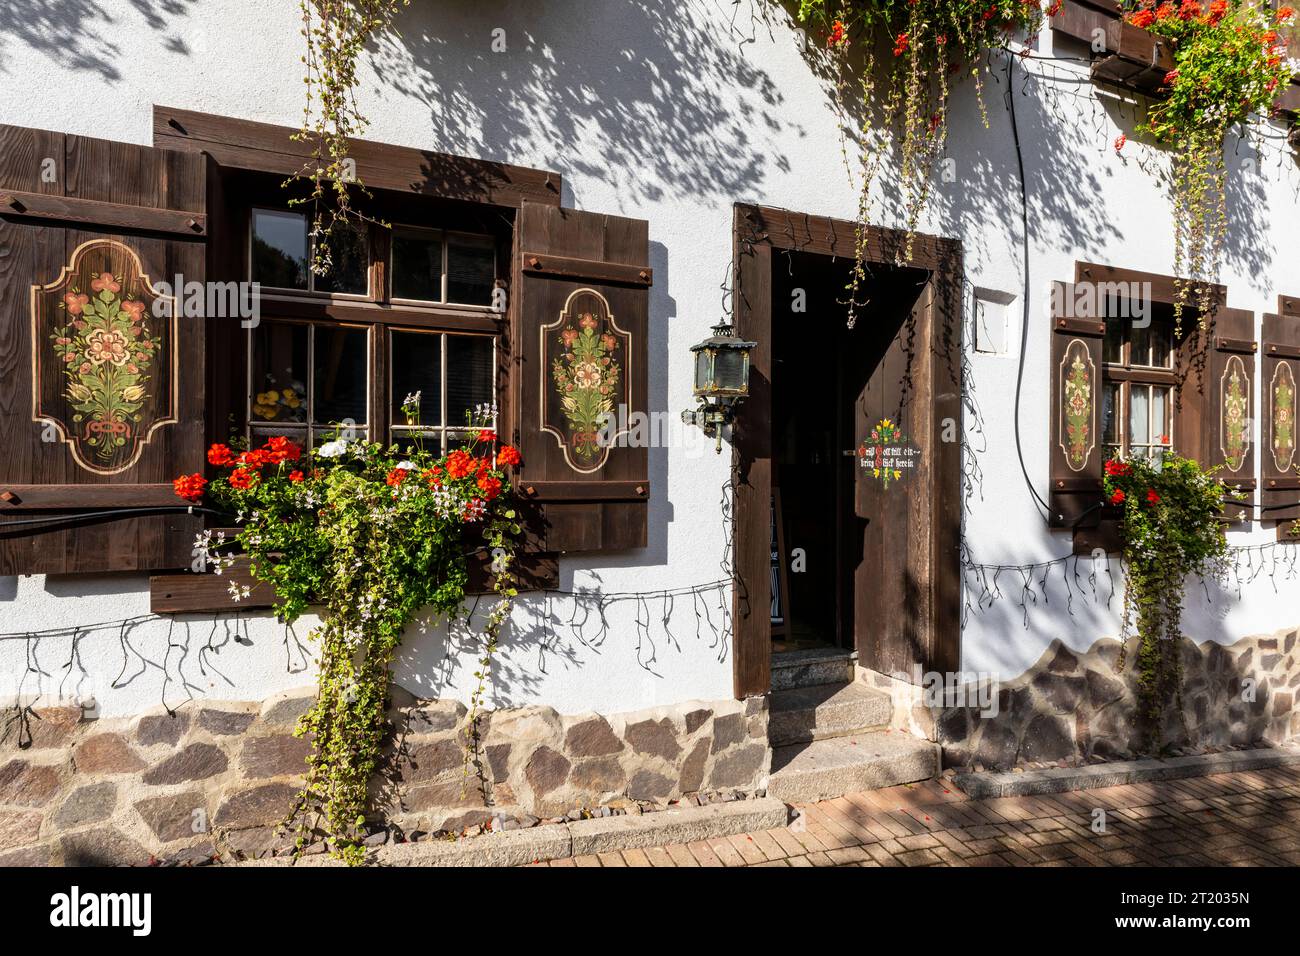 The facade of a traditional building in the Black Forest region with a popular inscription on the door. 'Grüß Gott tritt ein bring Glück herein', whic Stock Photo